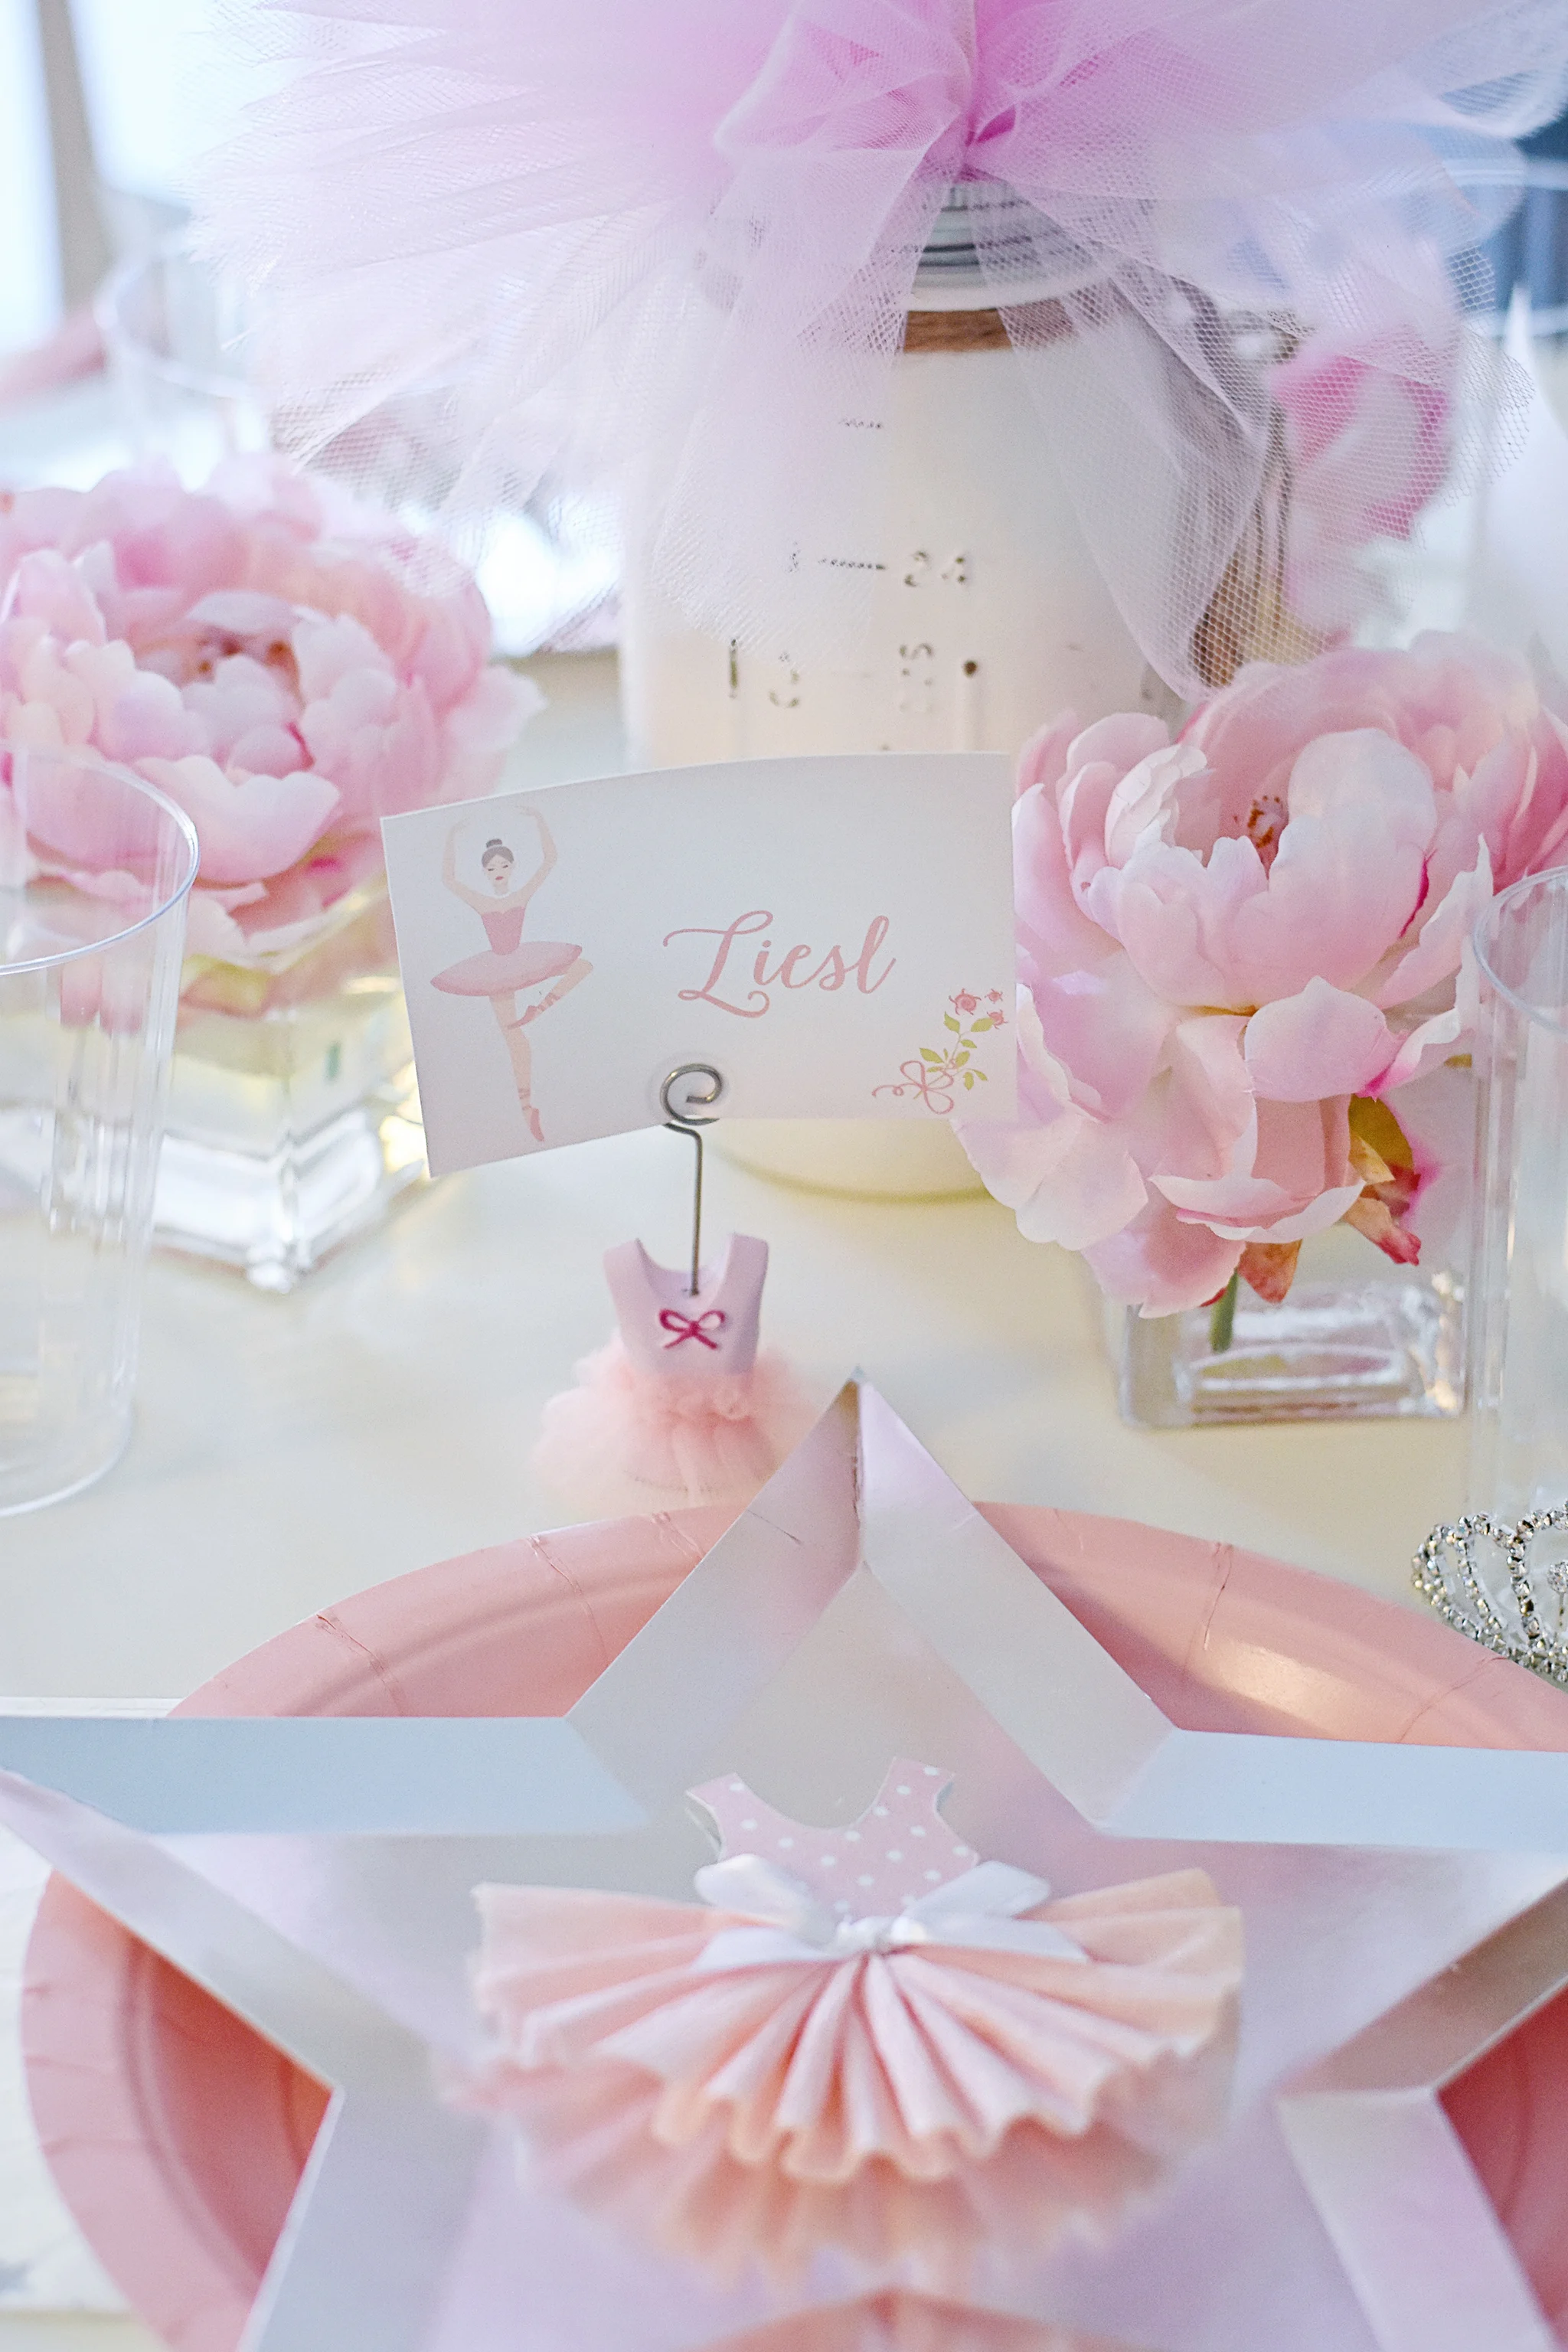 Tablesetting - stars, tulle, and pink flowers galore!